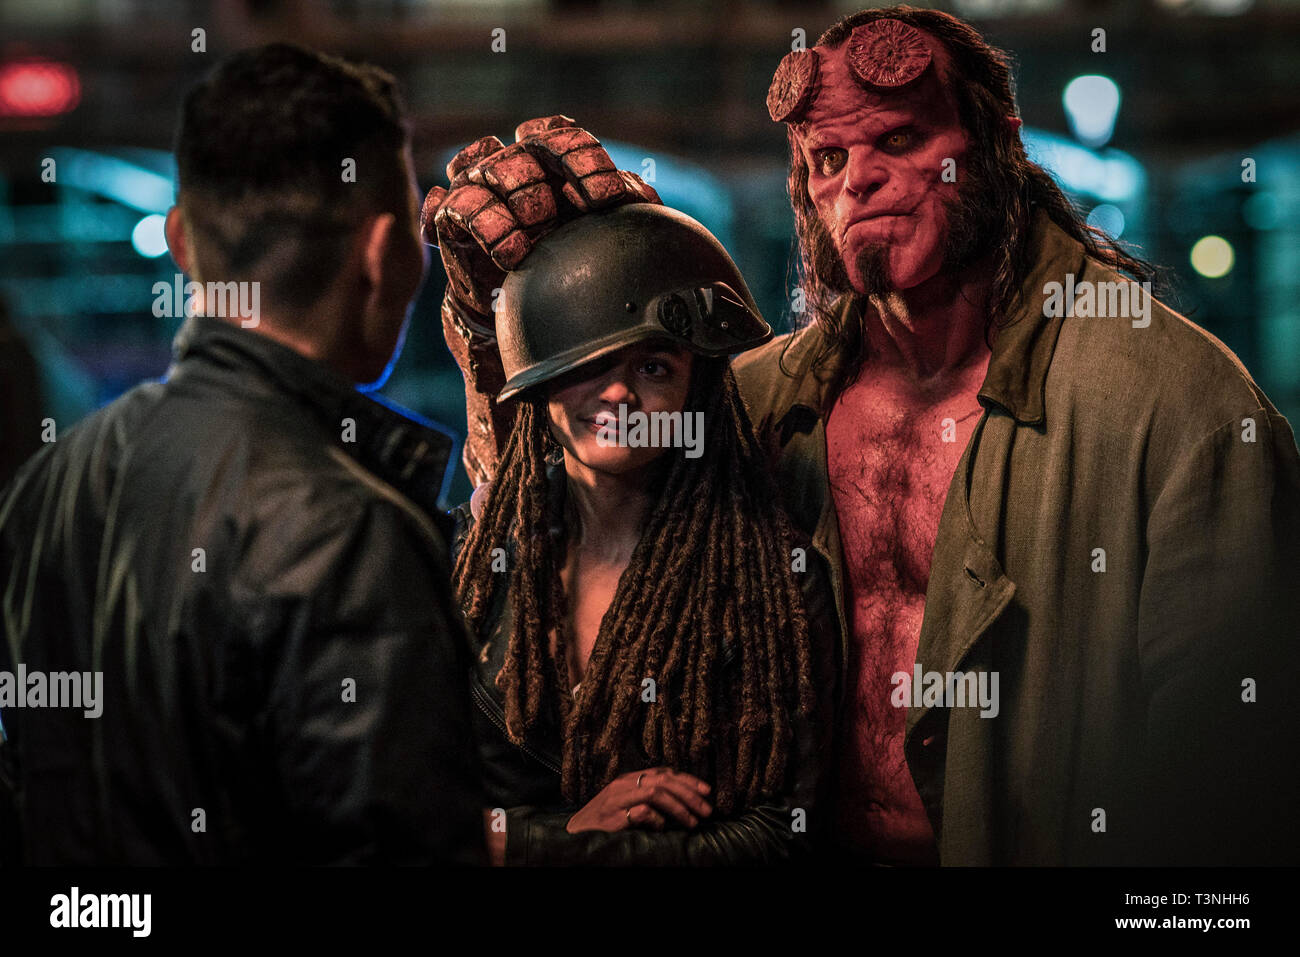 RELEASE DATE: April 12, 2019 TITLE: Hellboy STUDIO: Lionsgate DIRECTOR: Neil Marshall PLOT: Based on the graphic novels by Mike Mignola, Hellboy, caught between the worlds of the supernatural and human, battles an ancient sorceress bent on revenge. STARRING: DANIEL DAY KIM as Ben Daimio, SASHA LANE as Alice Monoghan, DAVID HARBOUR as Hellboy. (Credit Image: © Lionsgate/Entertainment Pictures) Stock Photo